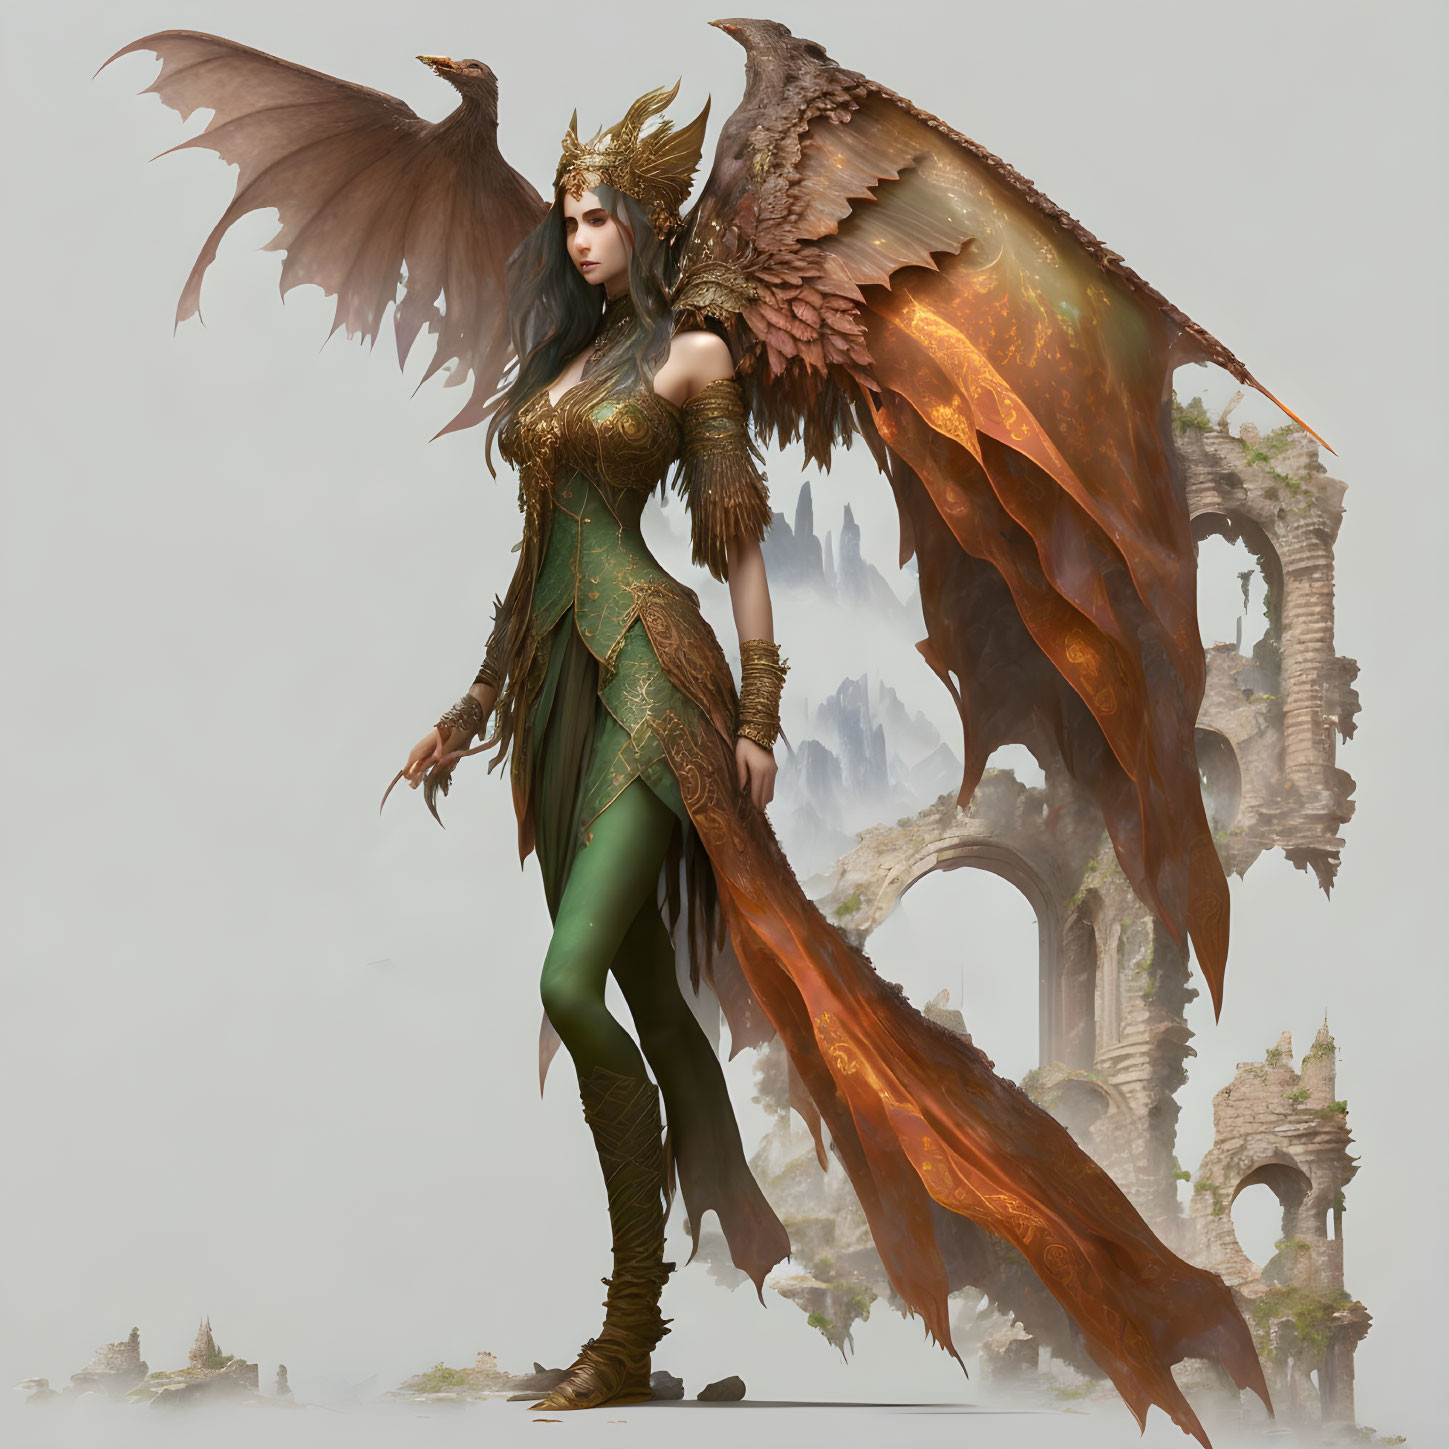 Fantasy female warrior with brown wings in ornate armor amidst ancient ruins